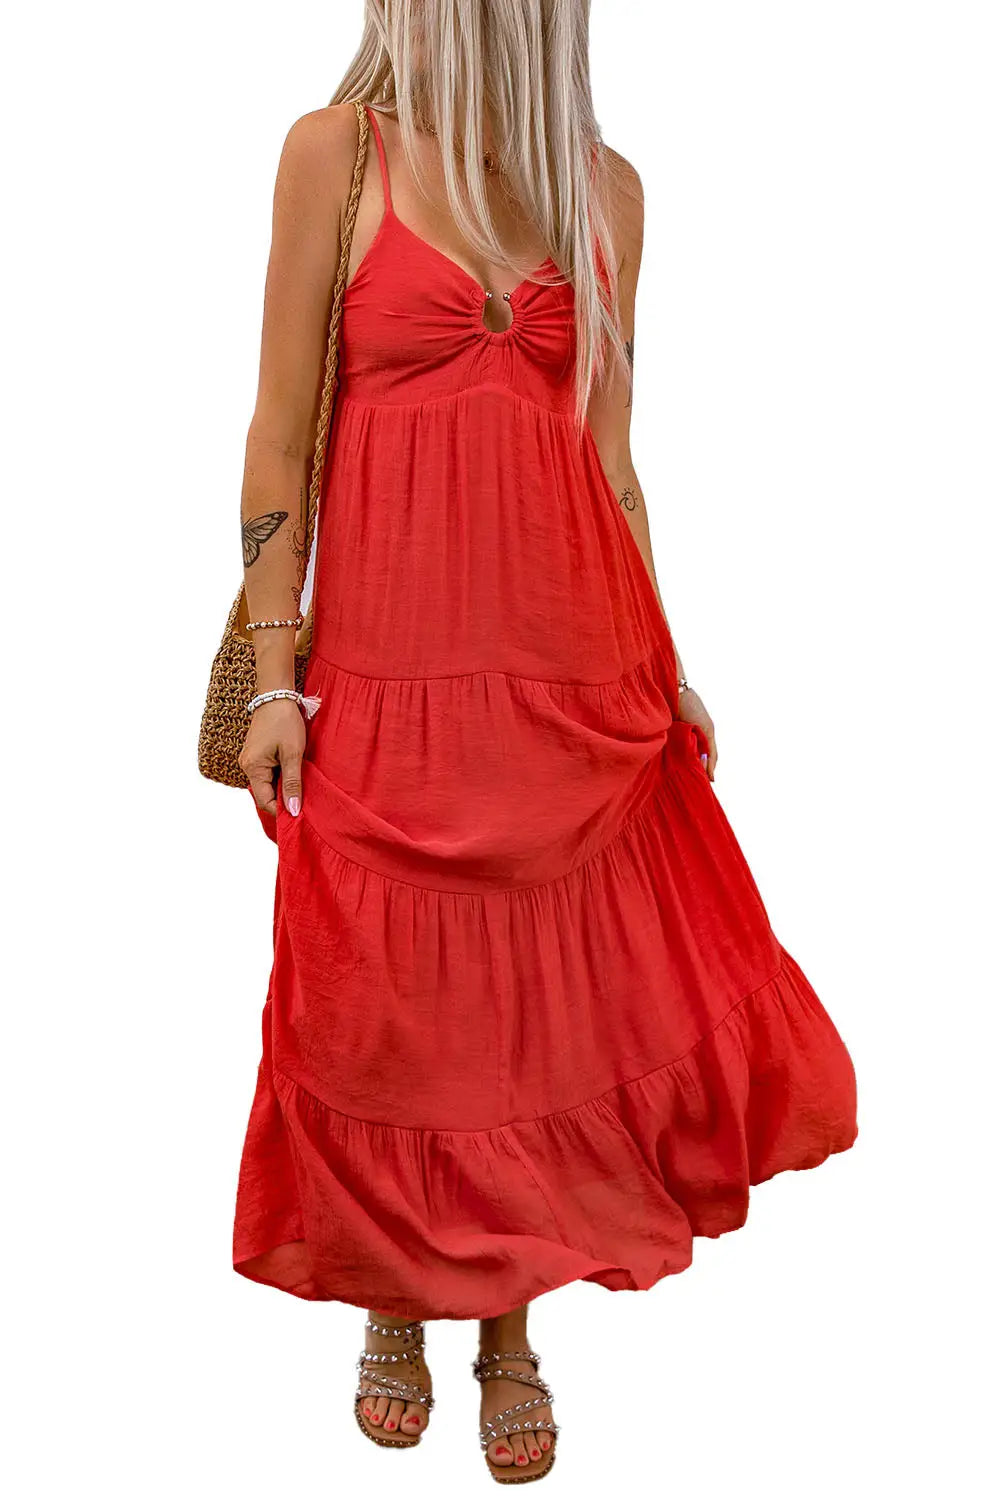 Red o-ring smocked back spaghetti straps tiered maxi dress - dresses